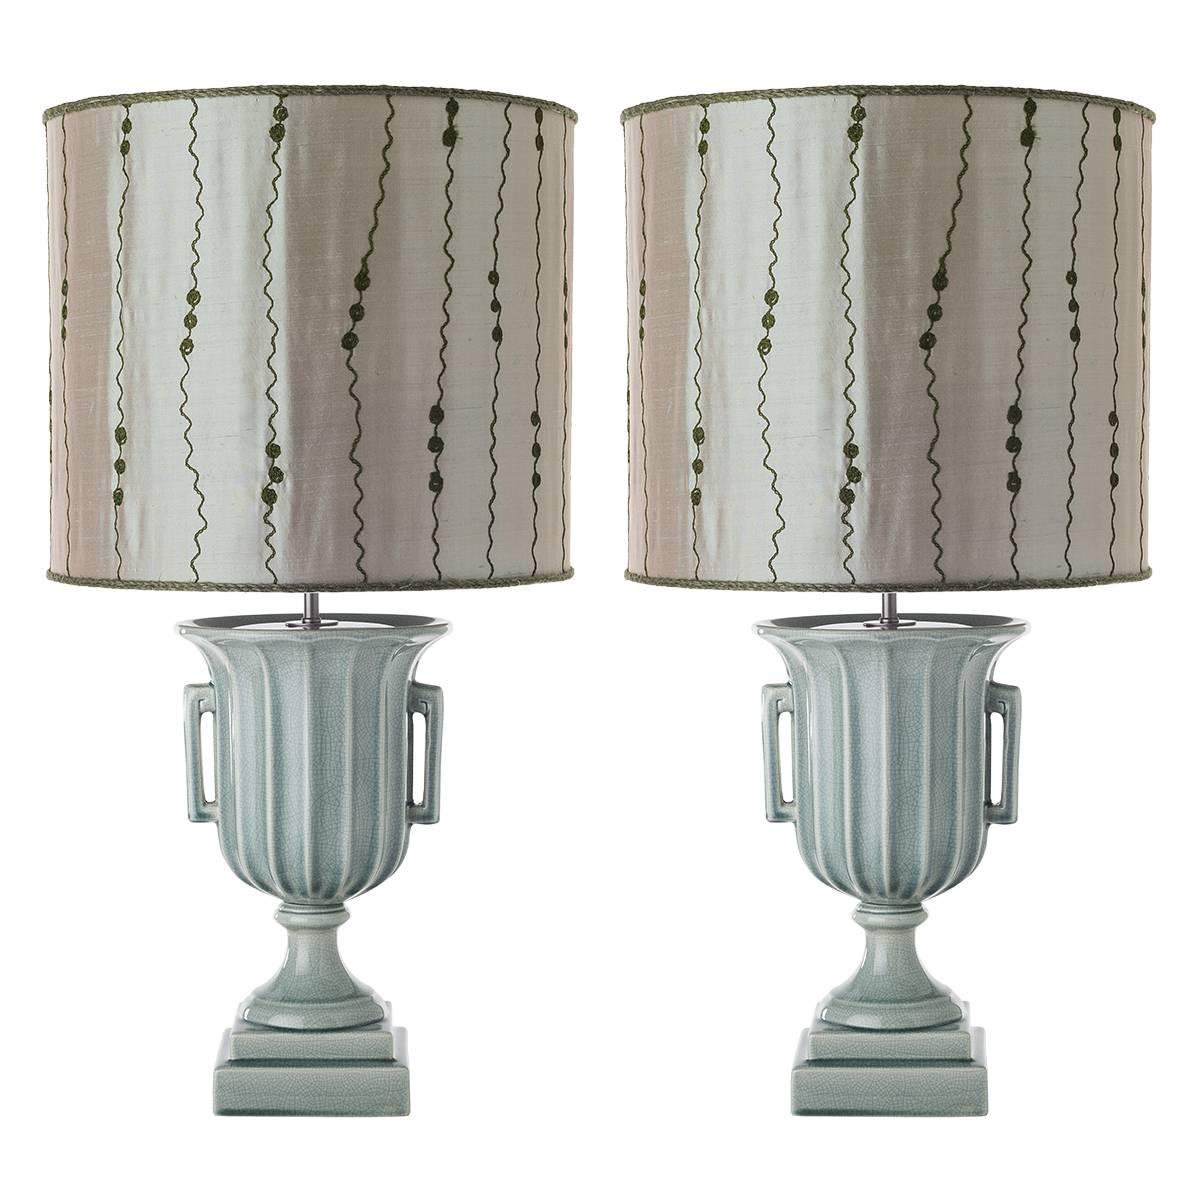 Trophy Cup Table Lamps, Contemporary Italian Design For Sale